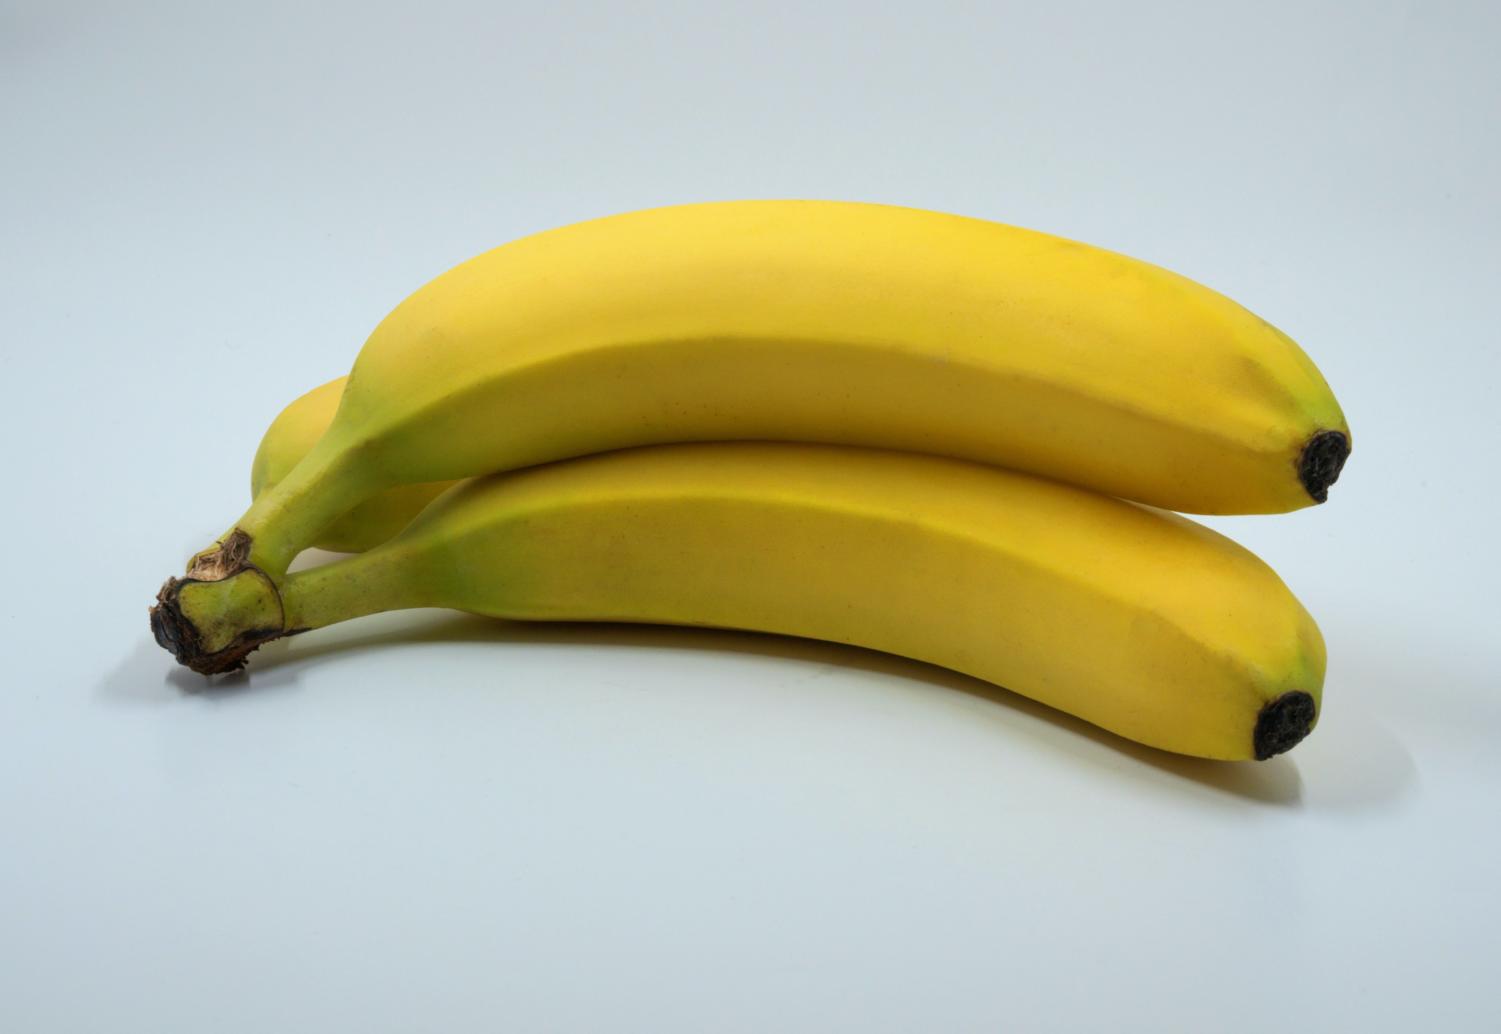 The Surprisingly Complex History of the Banana – The Science Survey